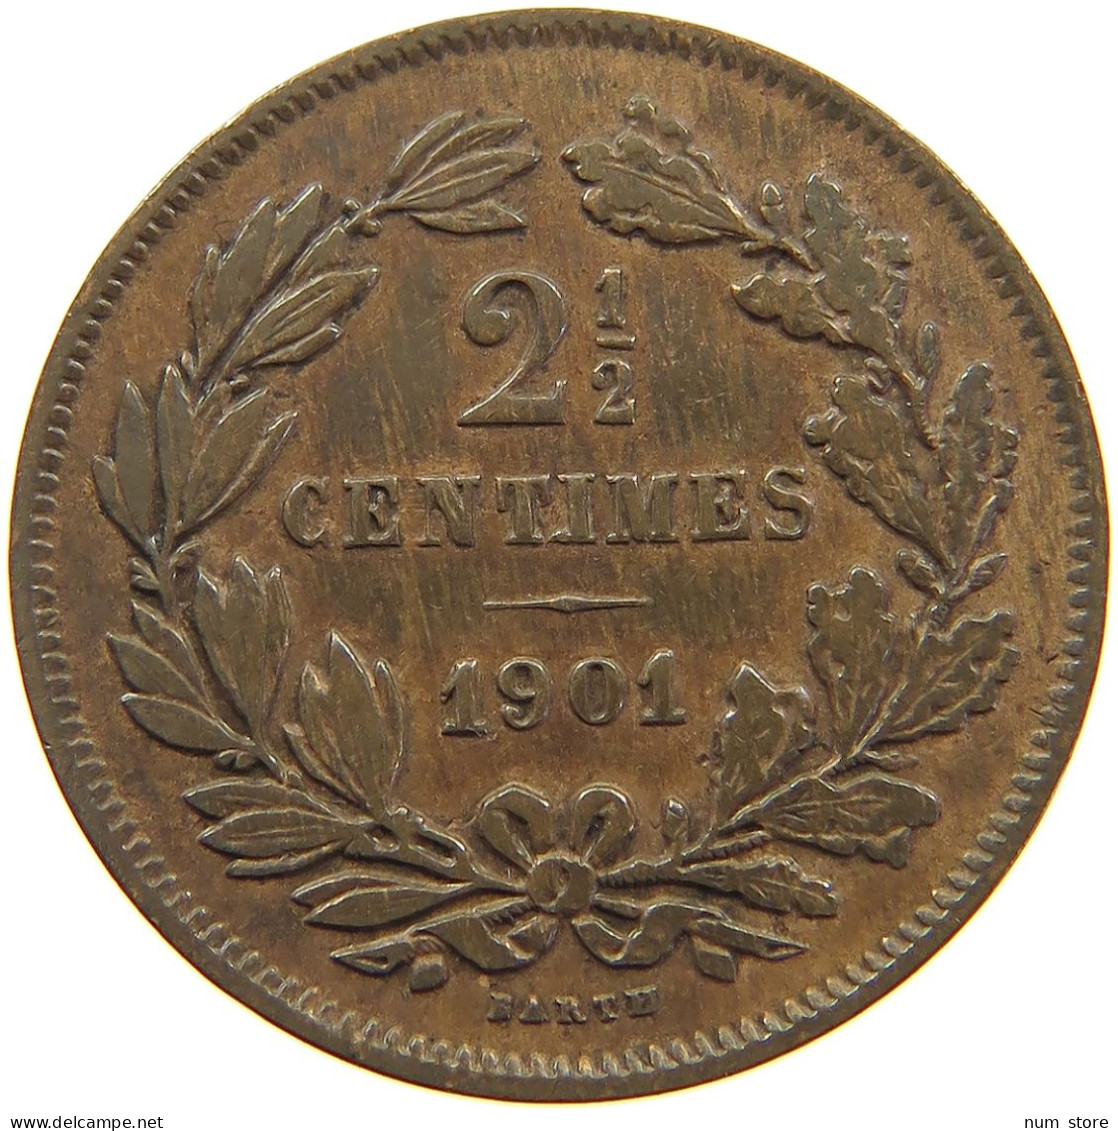 LUXEMBOURG 2 1/2 CENTIMES 1901 Adolph 1890 - 1905 #a062 0735 - Luxembourg